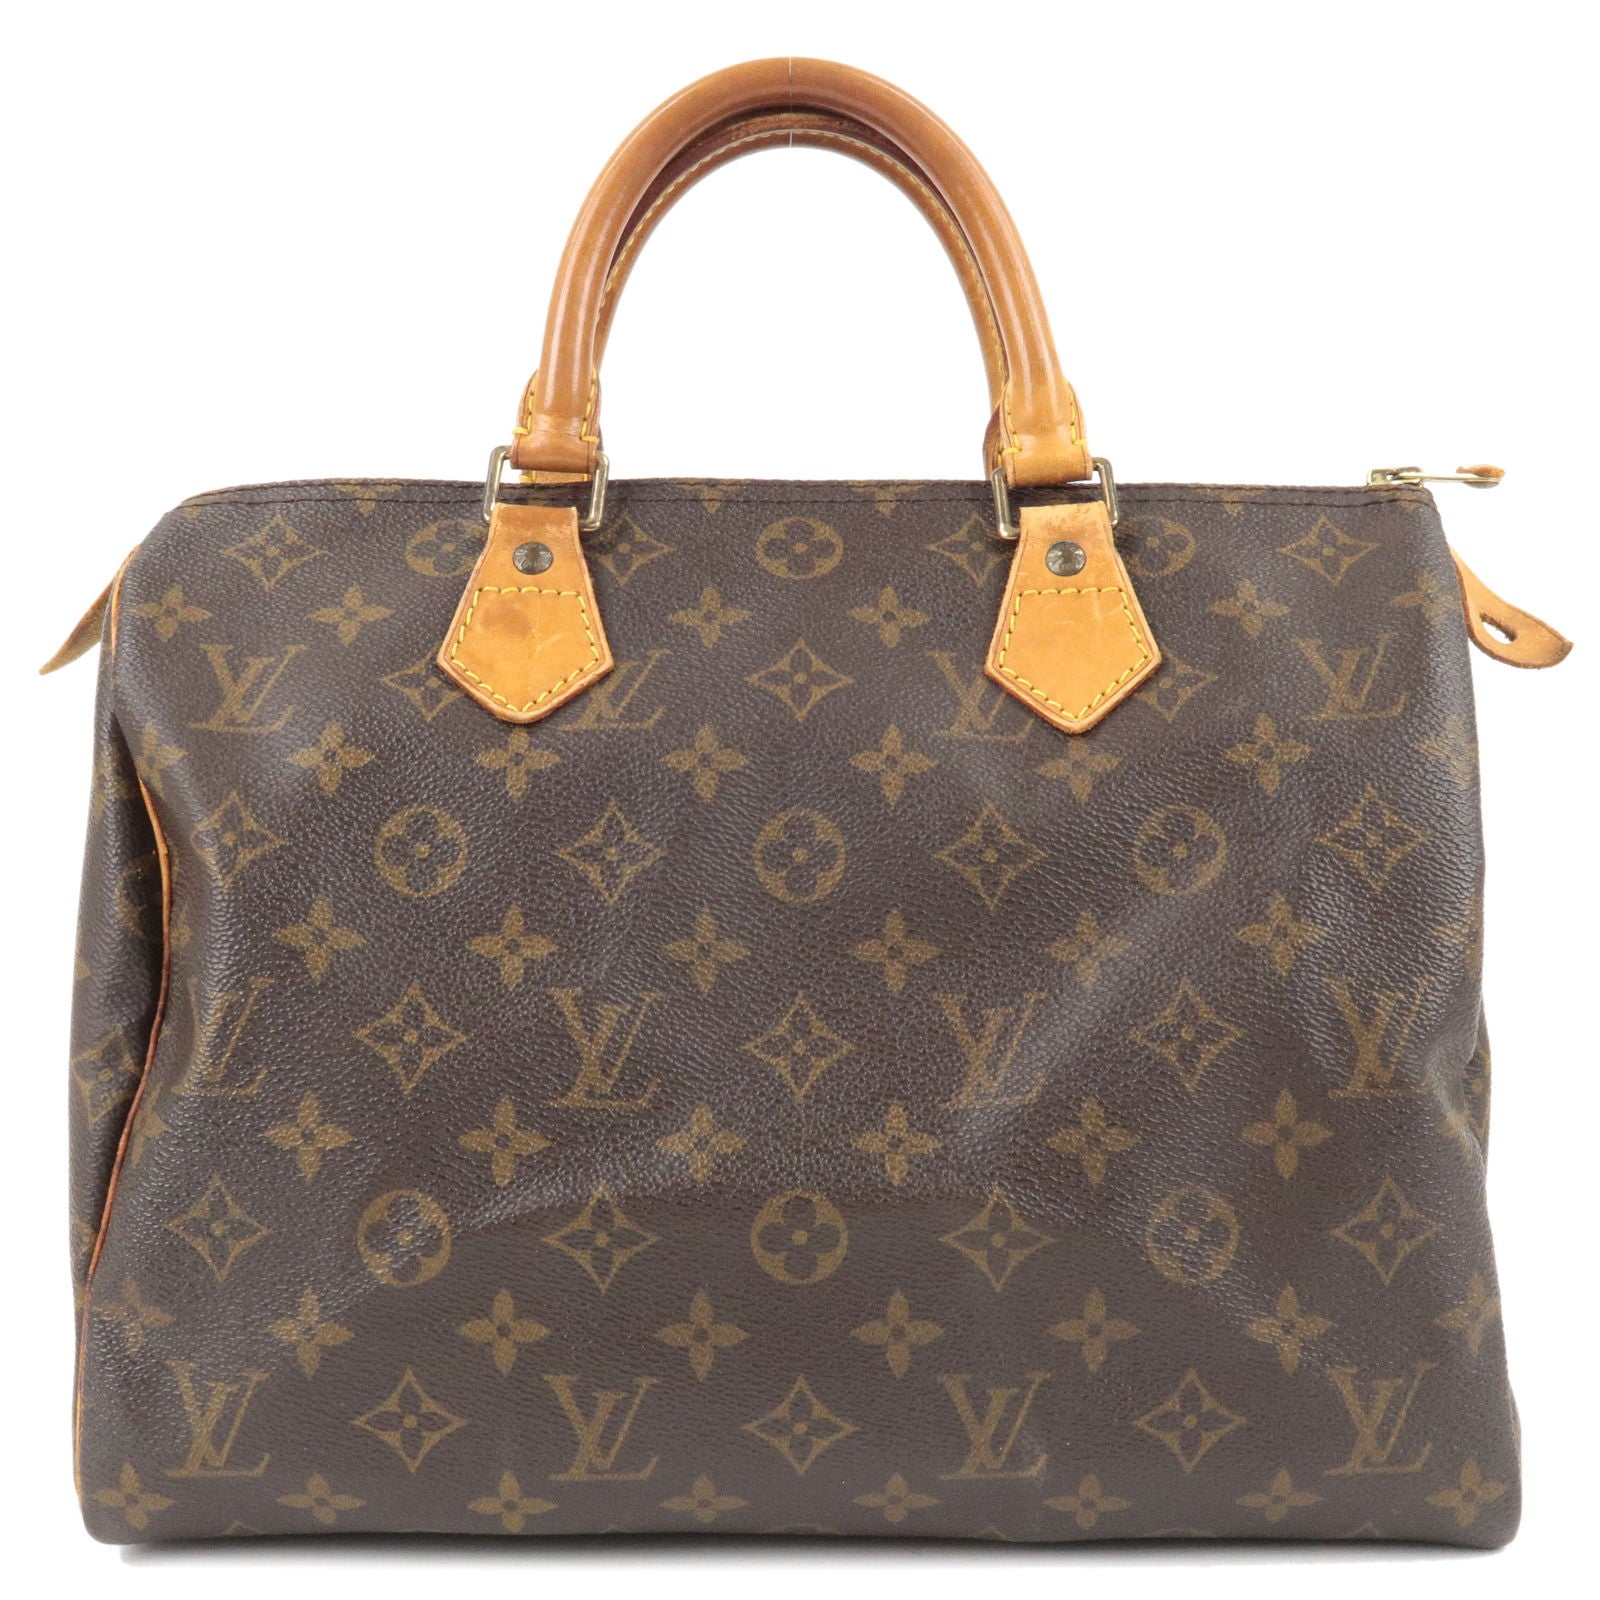 Shop for Louis Vuitton Black Epi Leather Riviera Handbag - Shipped from USA